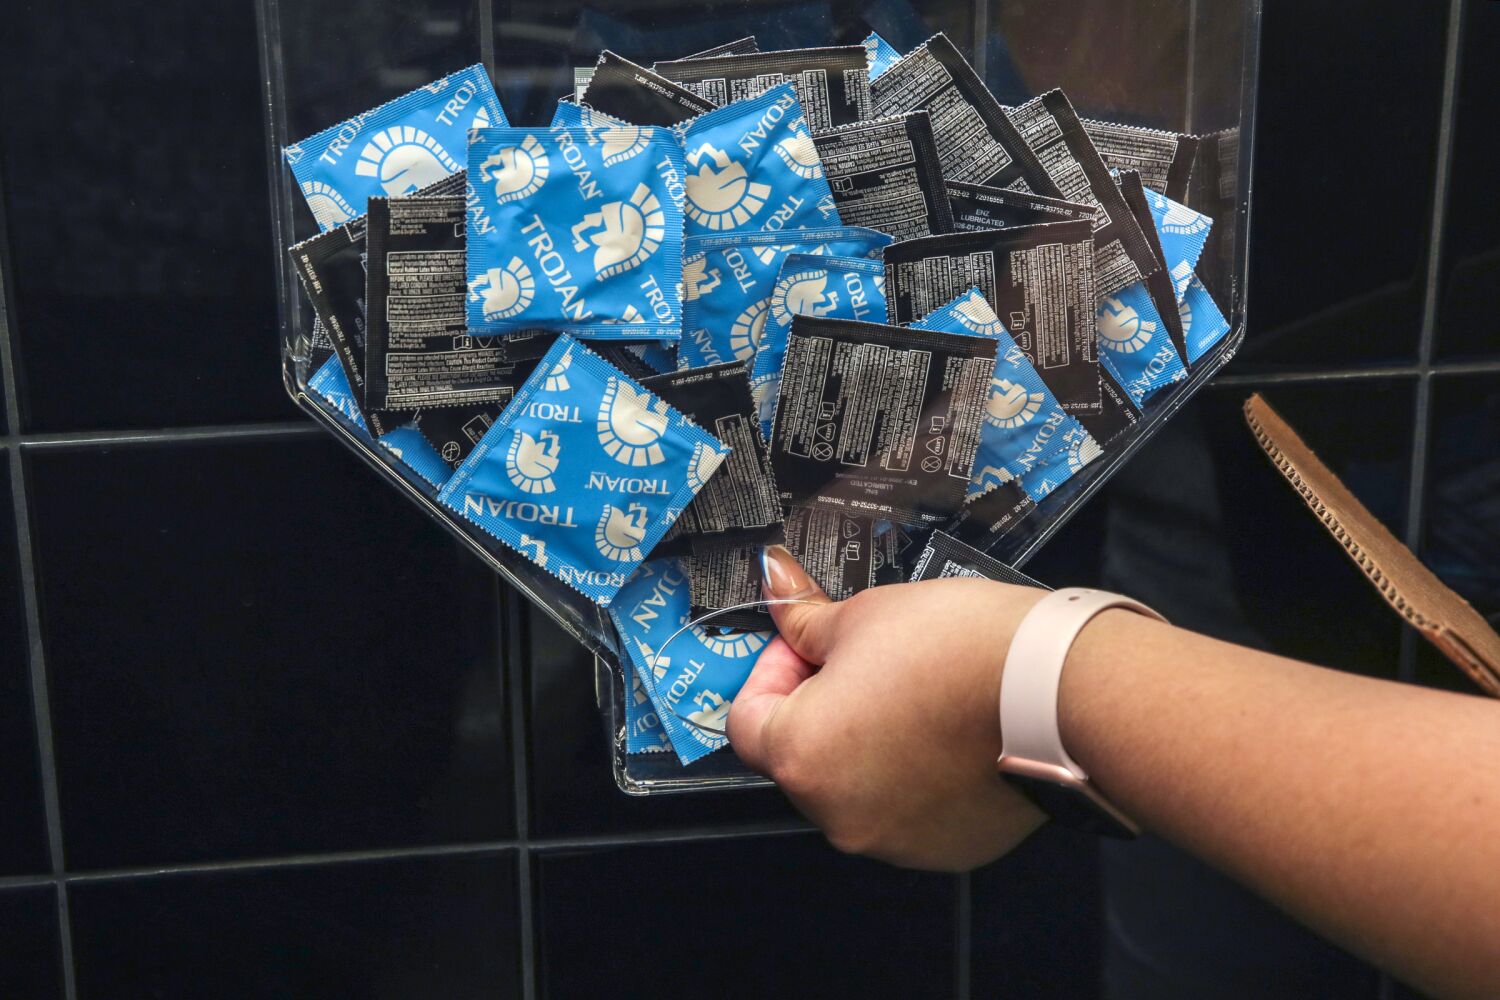 California bill would require all public high schools to hand out free condoms